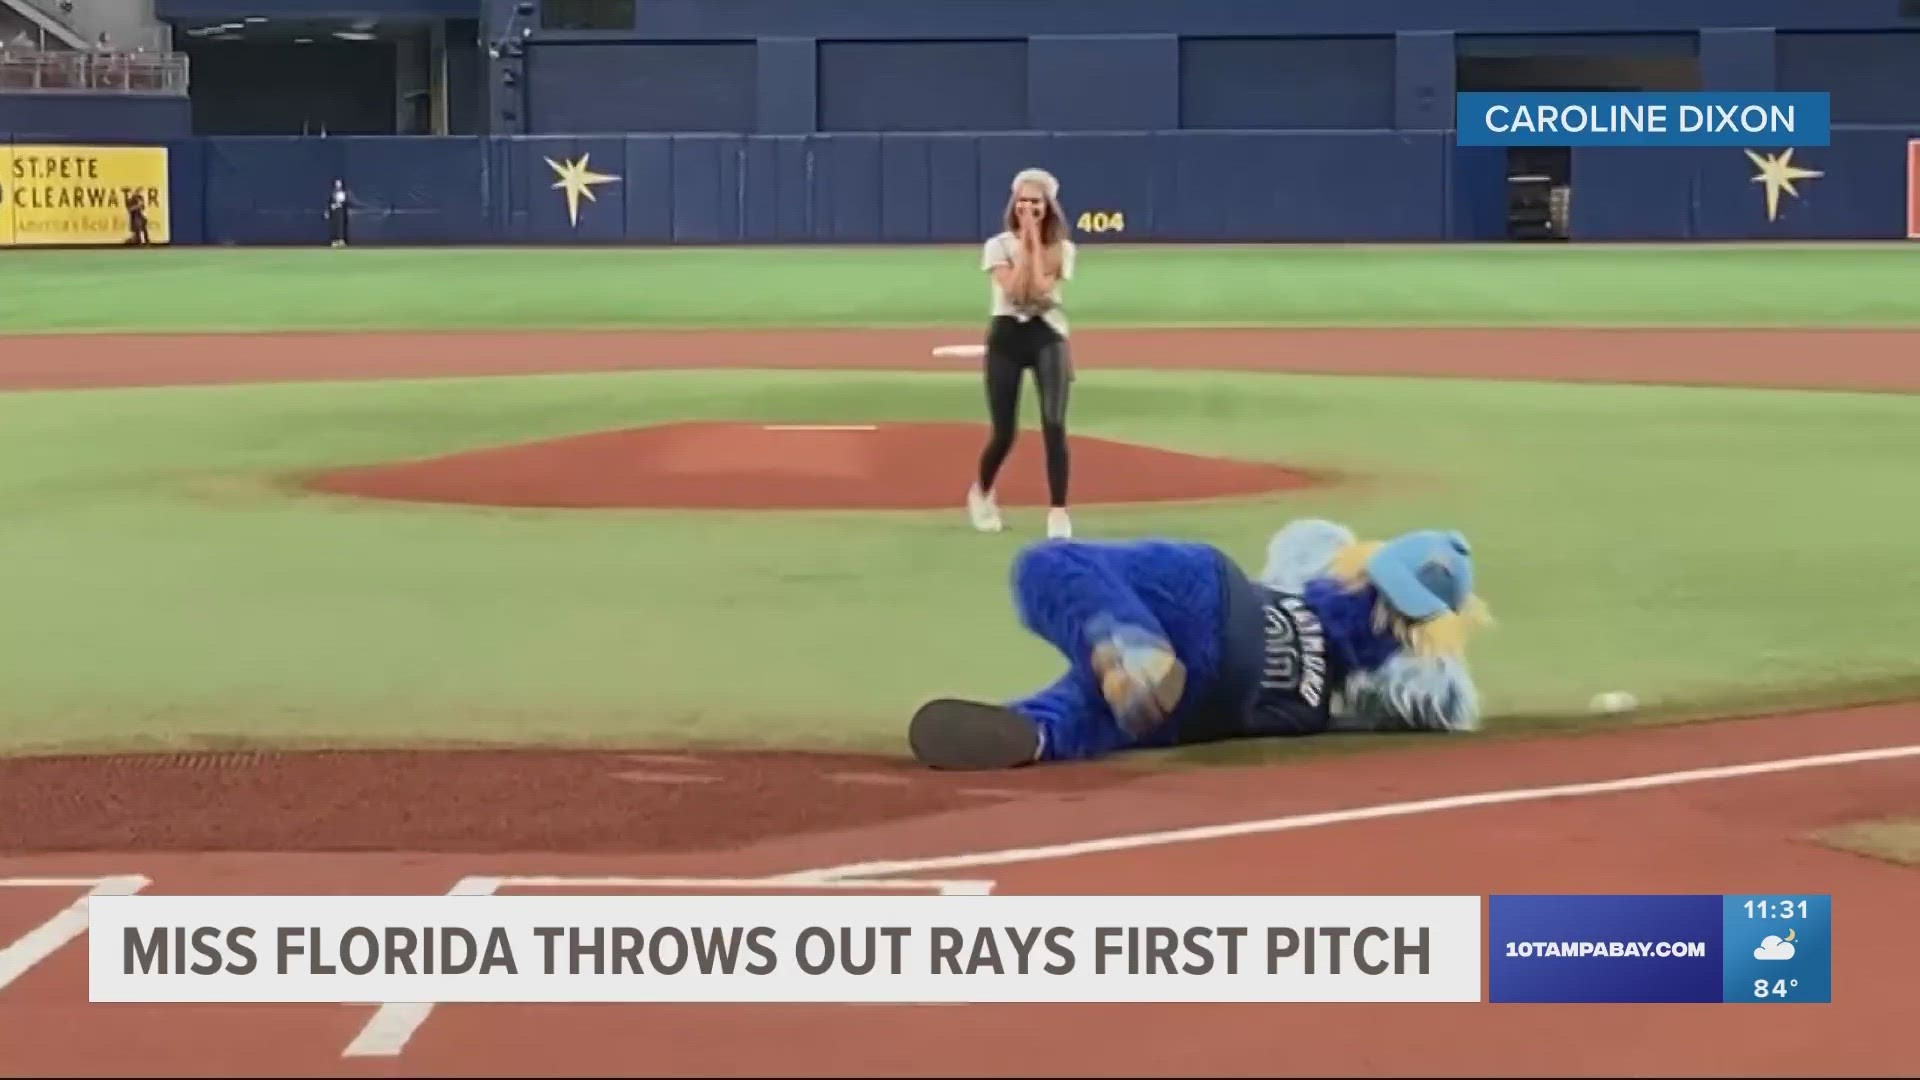 This is Dixon's first appearance with the Tampa Bay Rays and in an earlier interview, she said she hopes to work with more teams in the area.